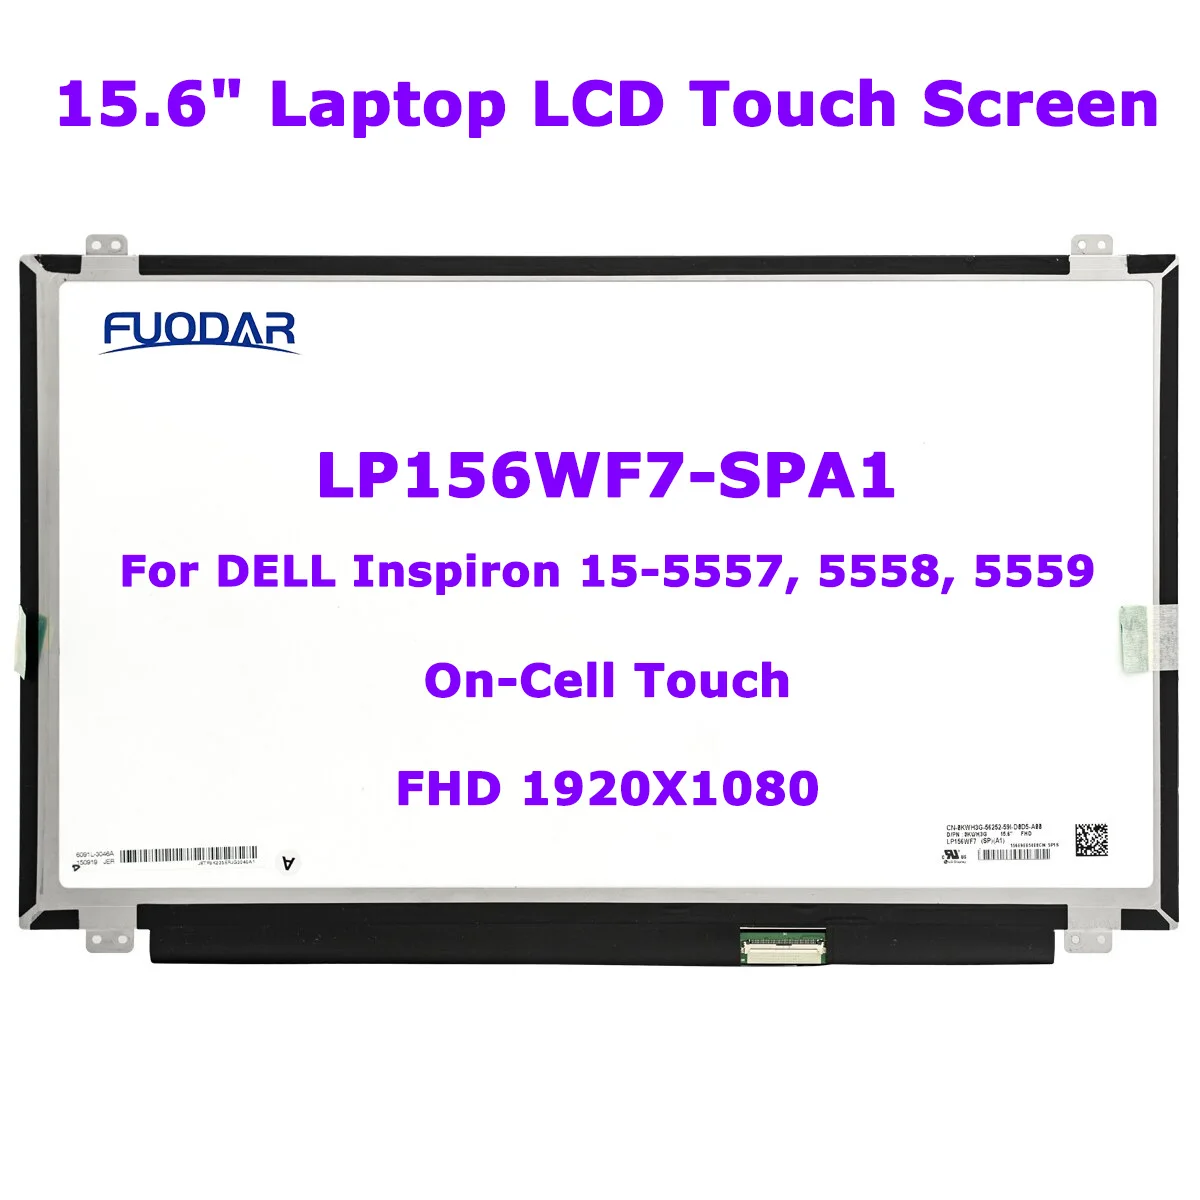 

15.6" LCD Touch Screen Widescreen LP156WF7-SPA1 LP156WF7-SPN1 For Dell Inspiron 15-5557 5558 5559 P51F001 P66F001 FHD 40pin eDP